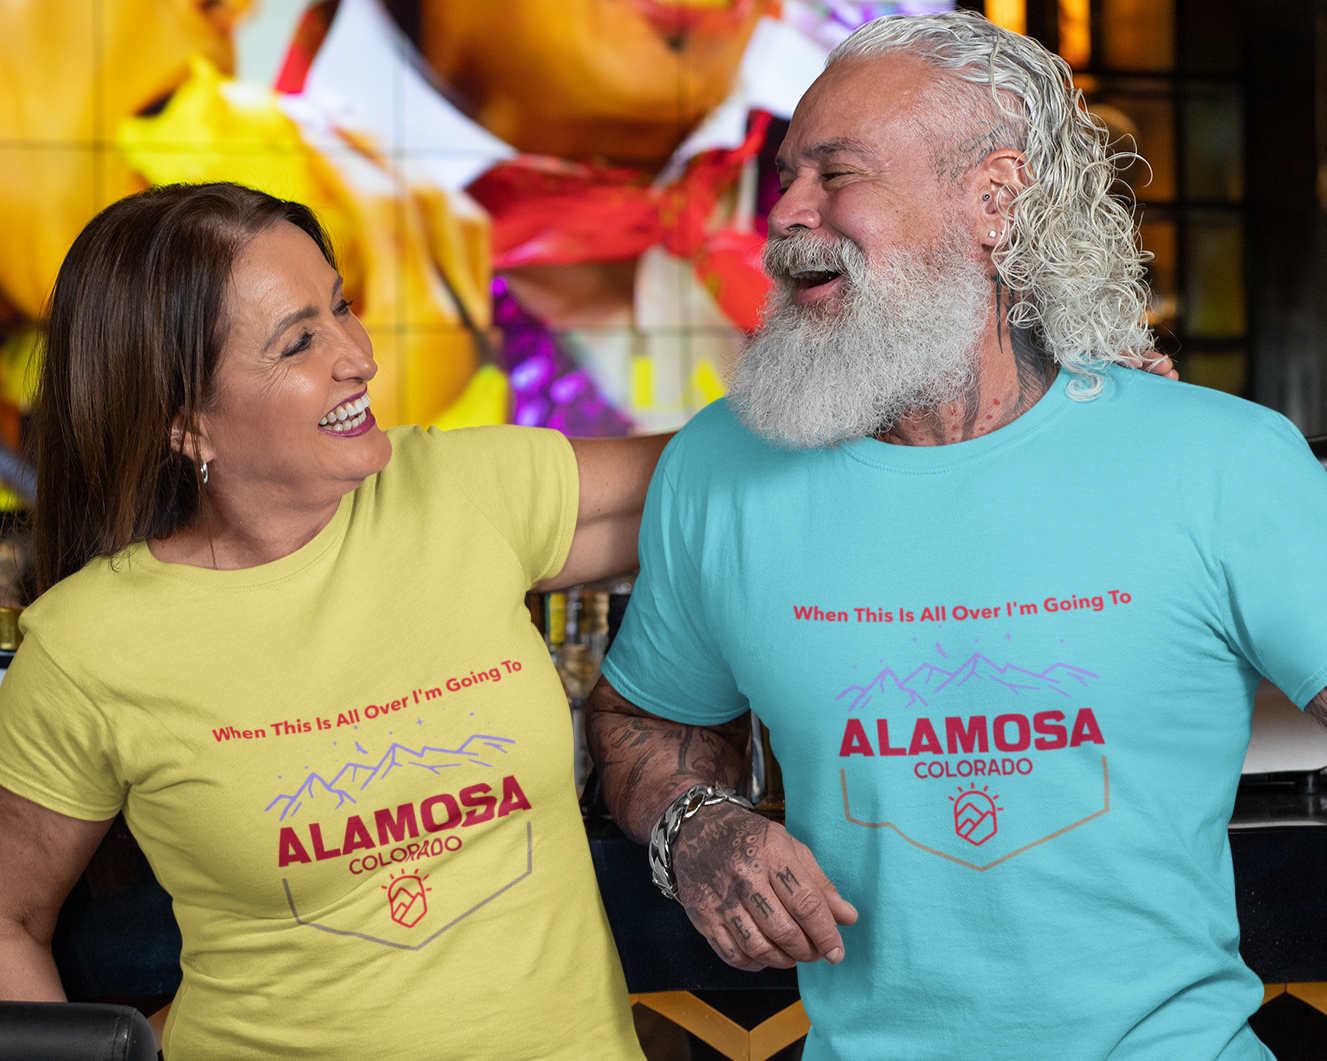 When This Is All Over I'm Going To Alamosa Colorado mountains T-shirt